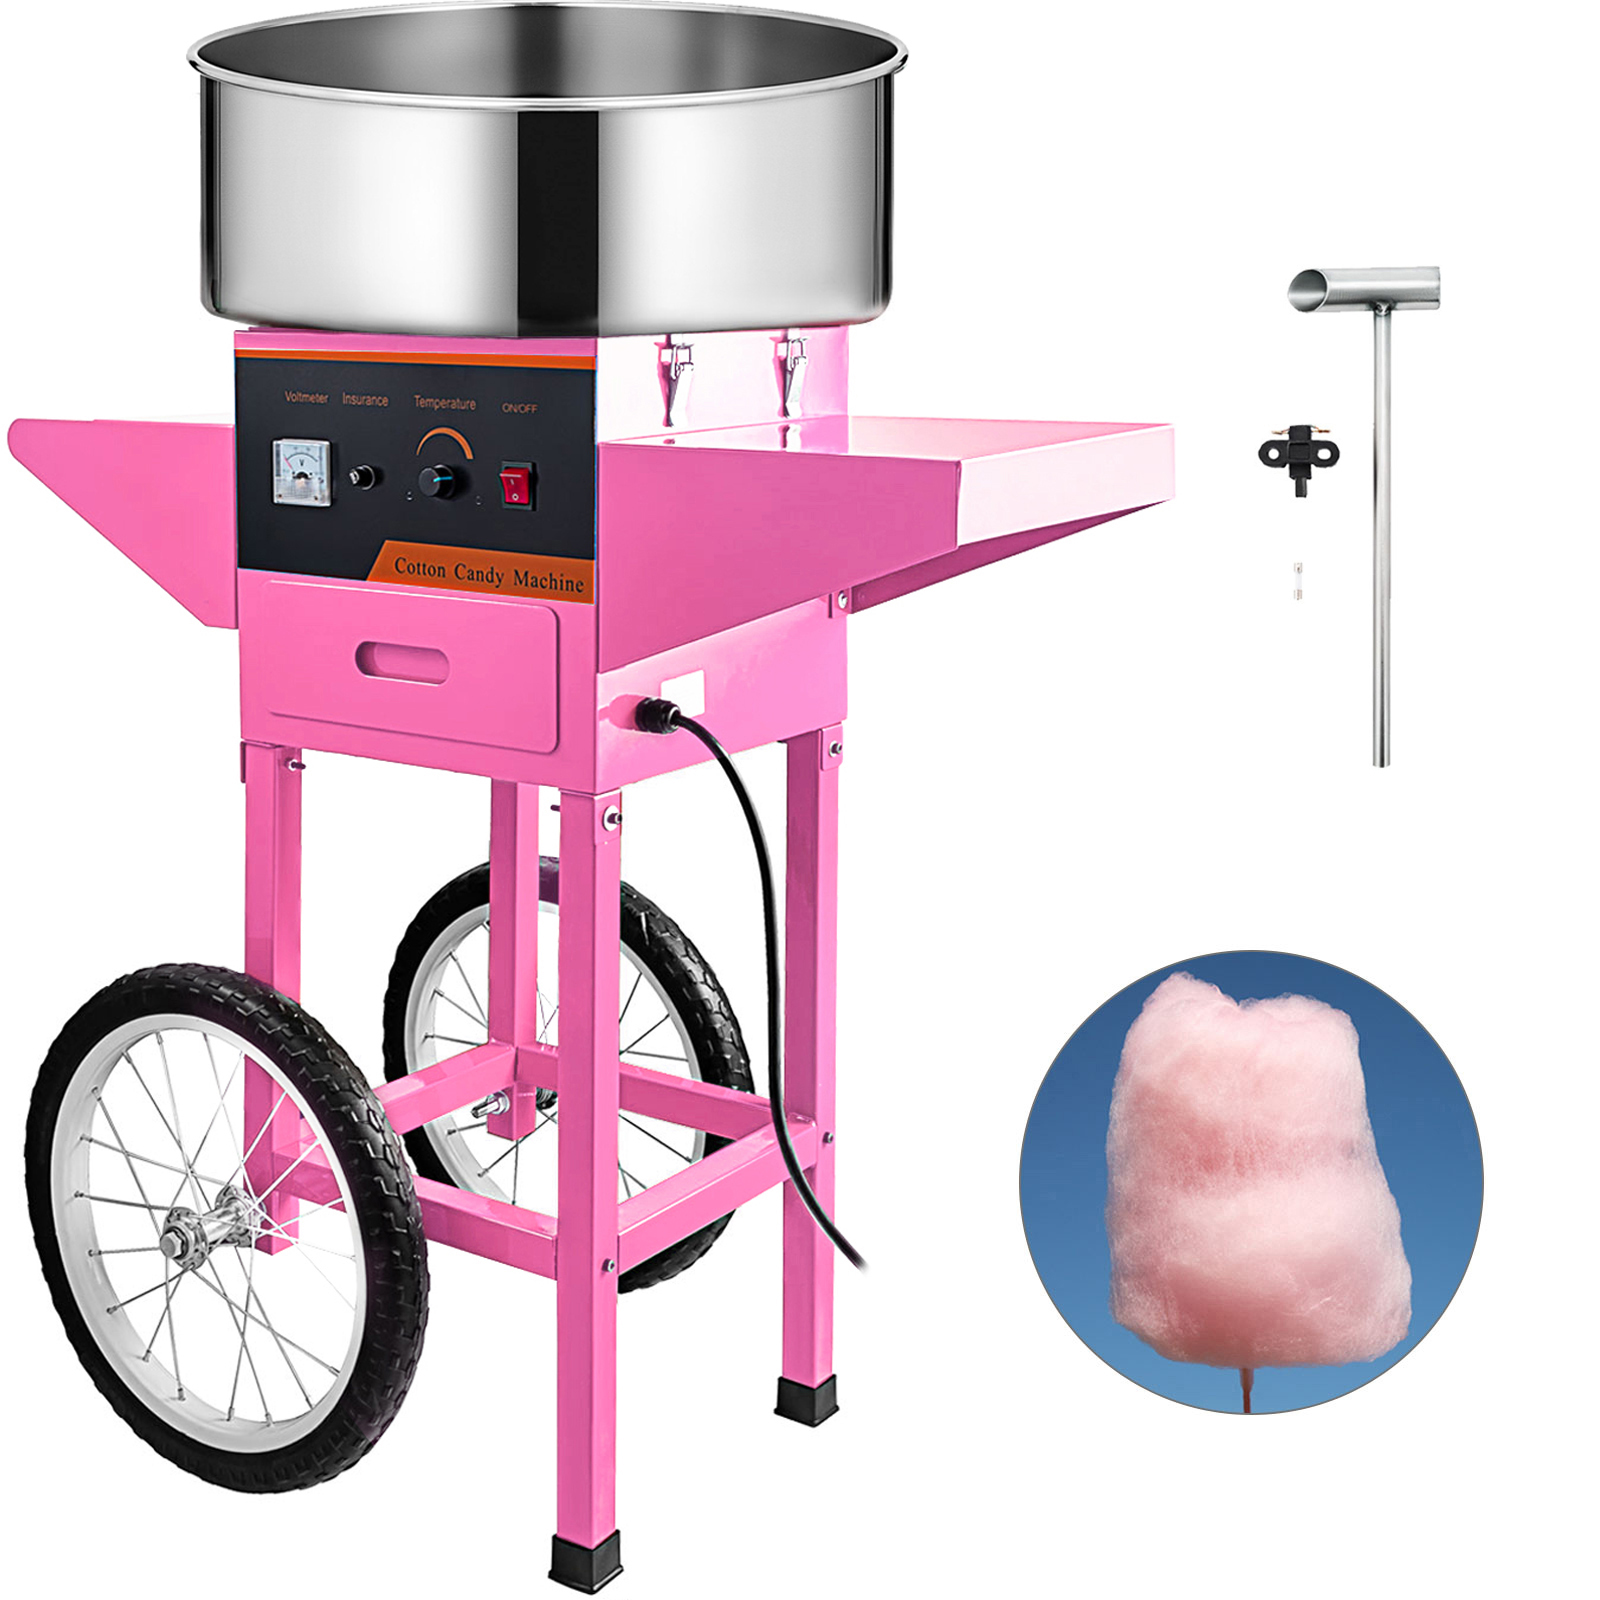 VEVOR Commercial Cotton Candy Machine Floss Maker Pink With Cart 